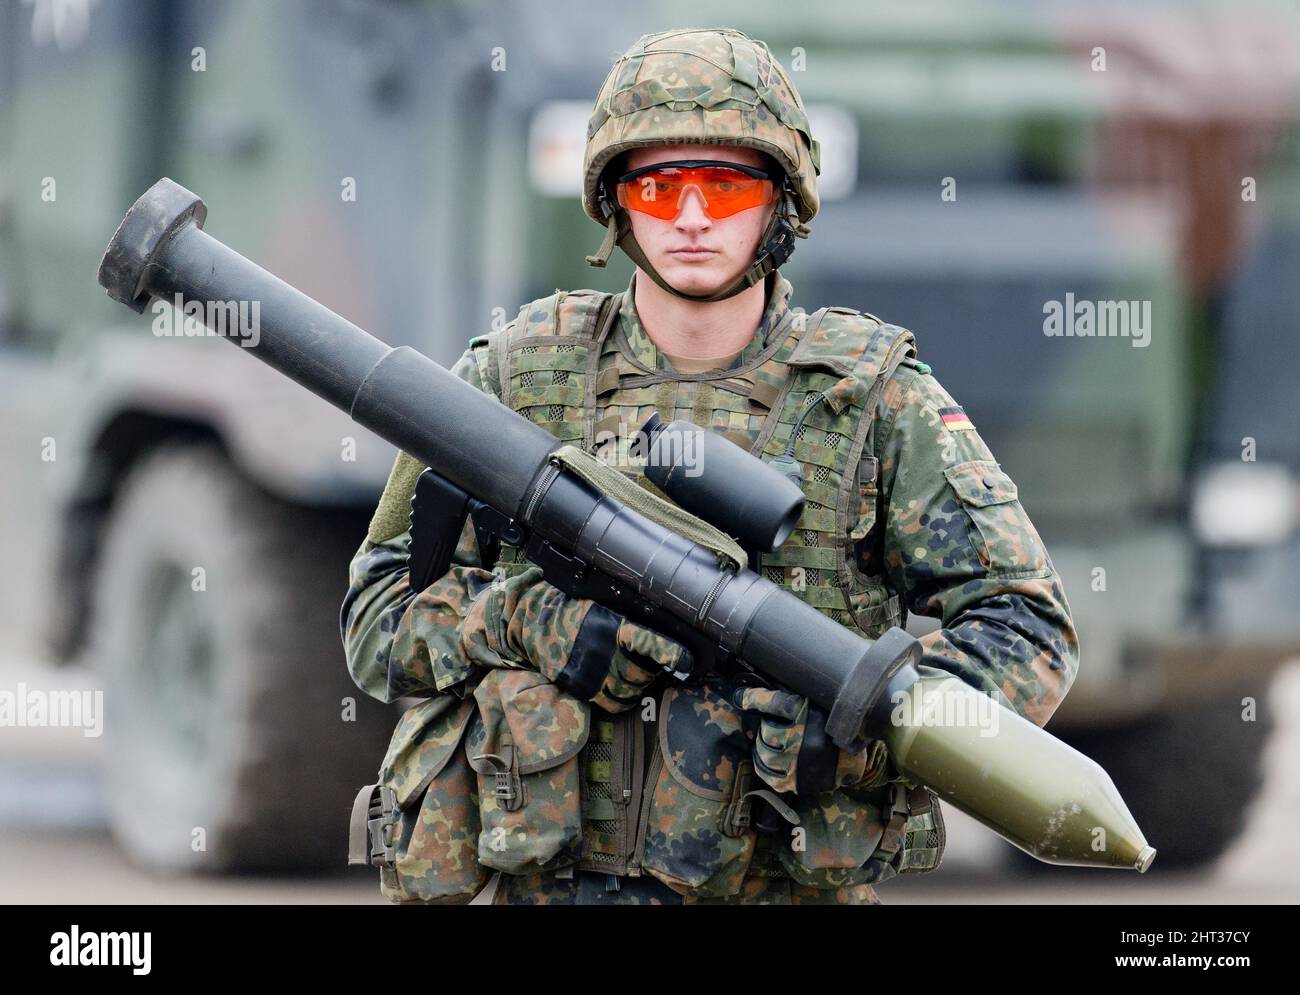 Munster, Germany. 14th Oct, 2016. A soldier holds a Panzerfaust 3 (anti-tank rocket launcher) at the Munster military training area (Lower Saxony) during the information training exercise 'Land Operations 2016'. Germany is now supplying weapons from Bundeswehr stocks to Ukraine. According to government spokesman Hebestreit, the Ukrainian armed forces will be supported with 1000 anti-tank weapons as well as 500 surface-to-air missiles of the type 'Stinger'. (To dpa 'Germany supplies weapons from Bundeswehr stocks to Ukraine') Credit: picture alliance/dpa/Alamy Live News Stock Photo